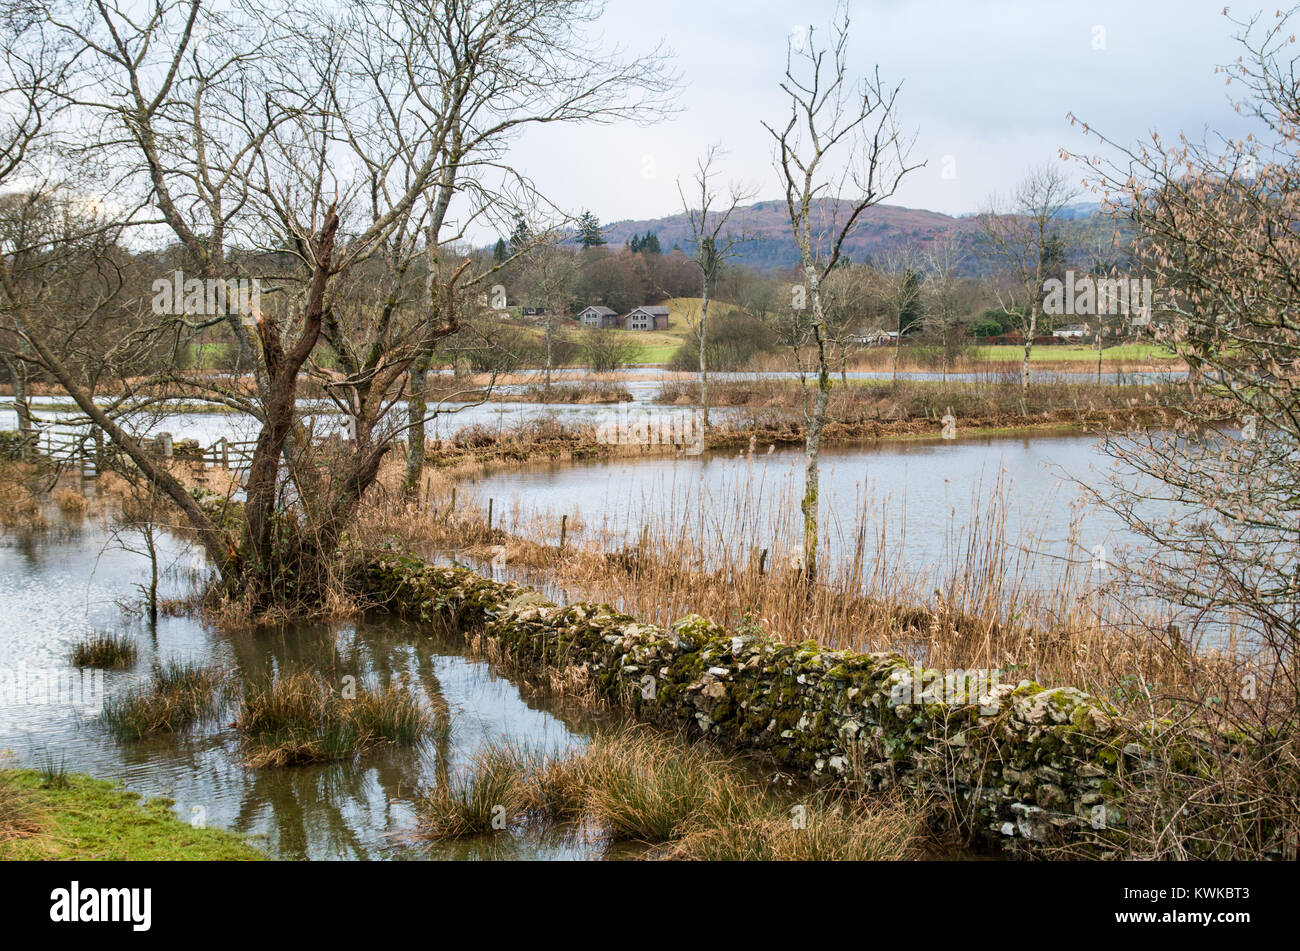 A flooded field in lake district with trees and stone fence in water. Stock Photo